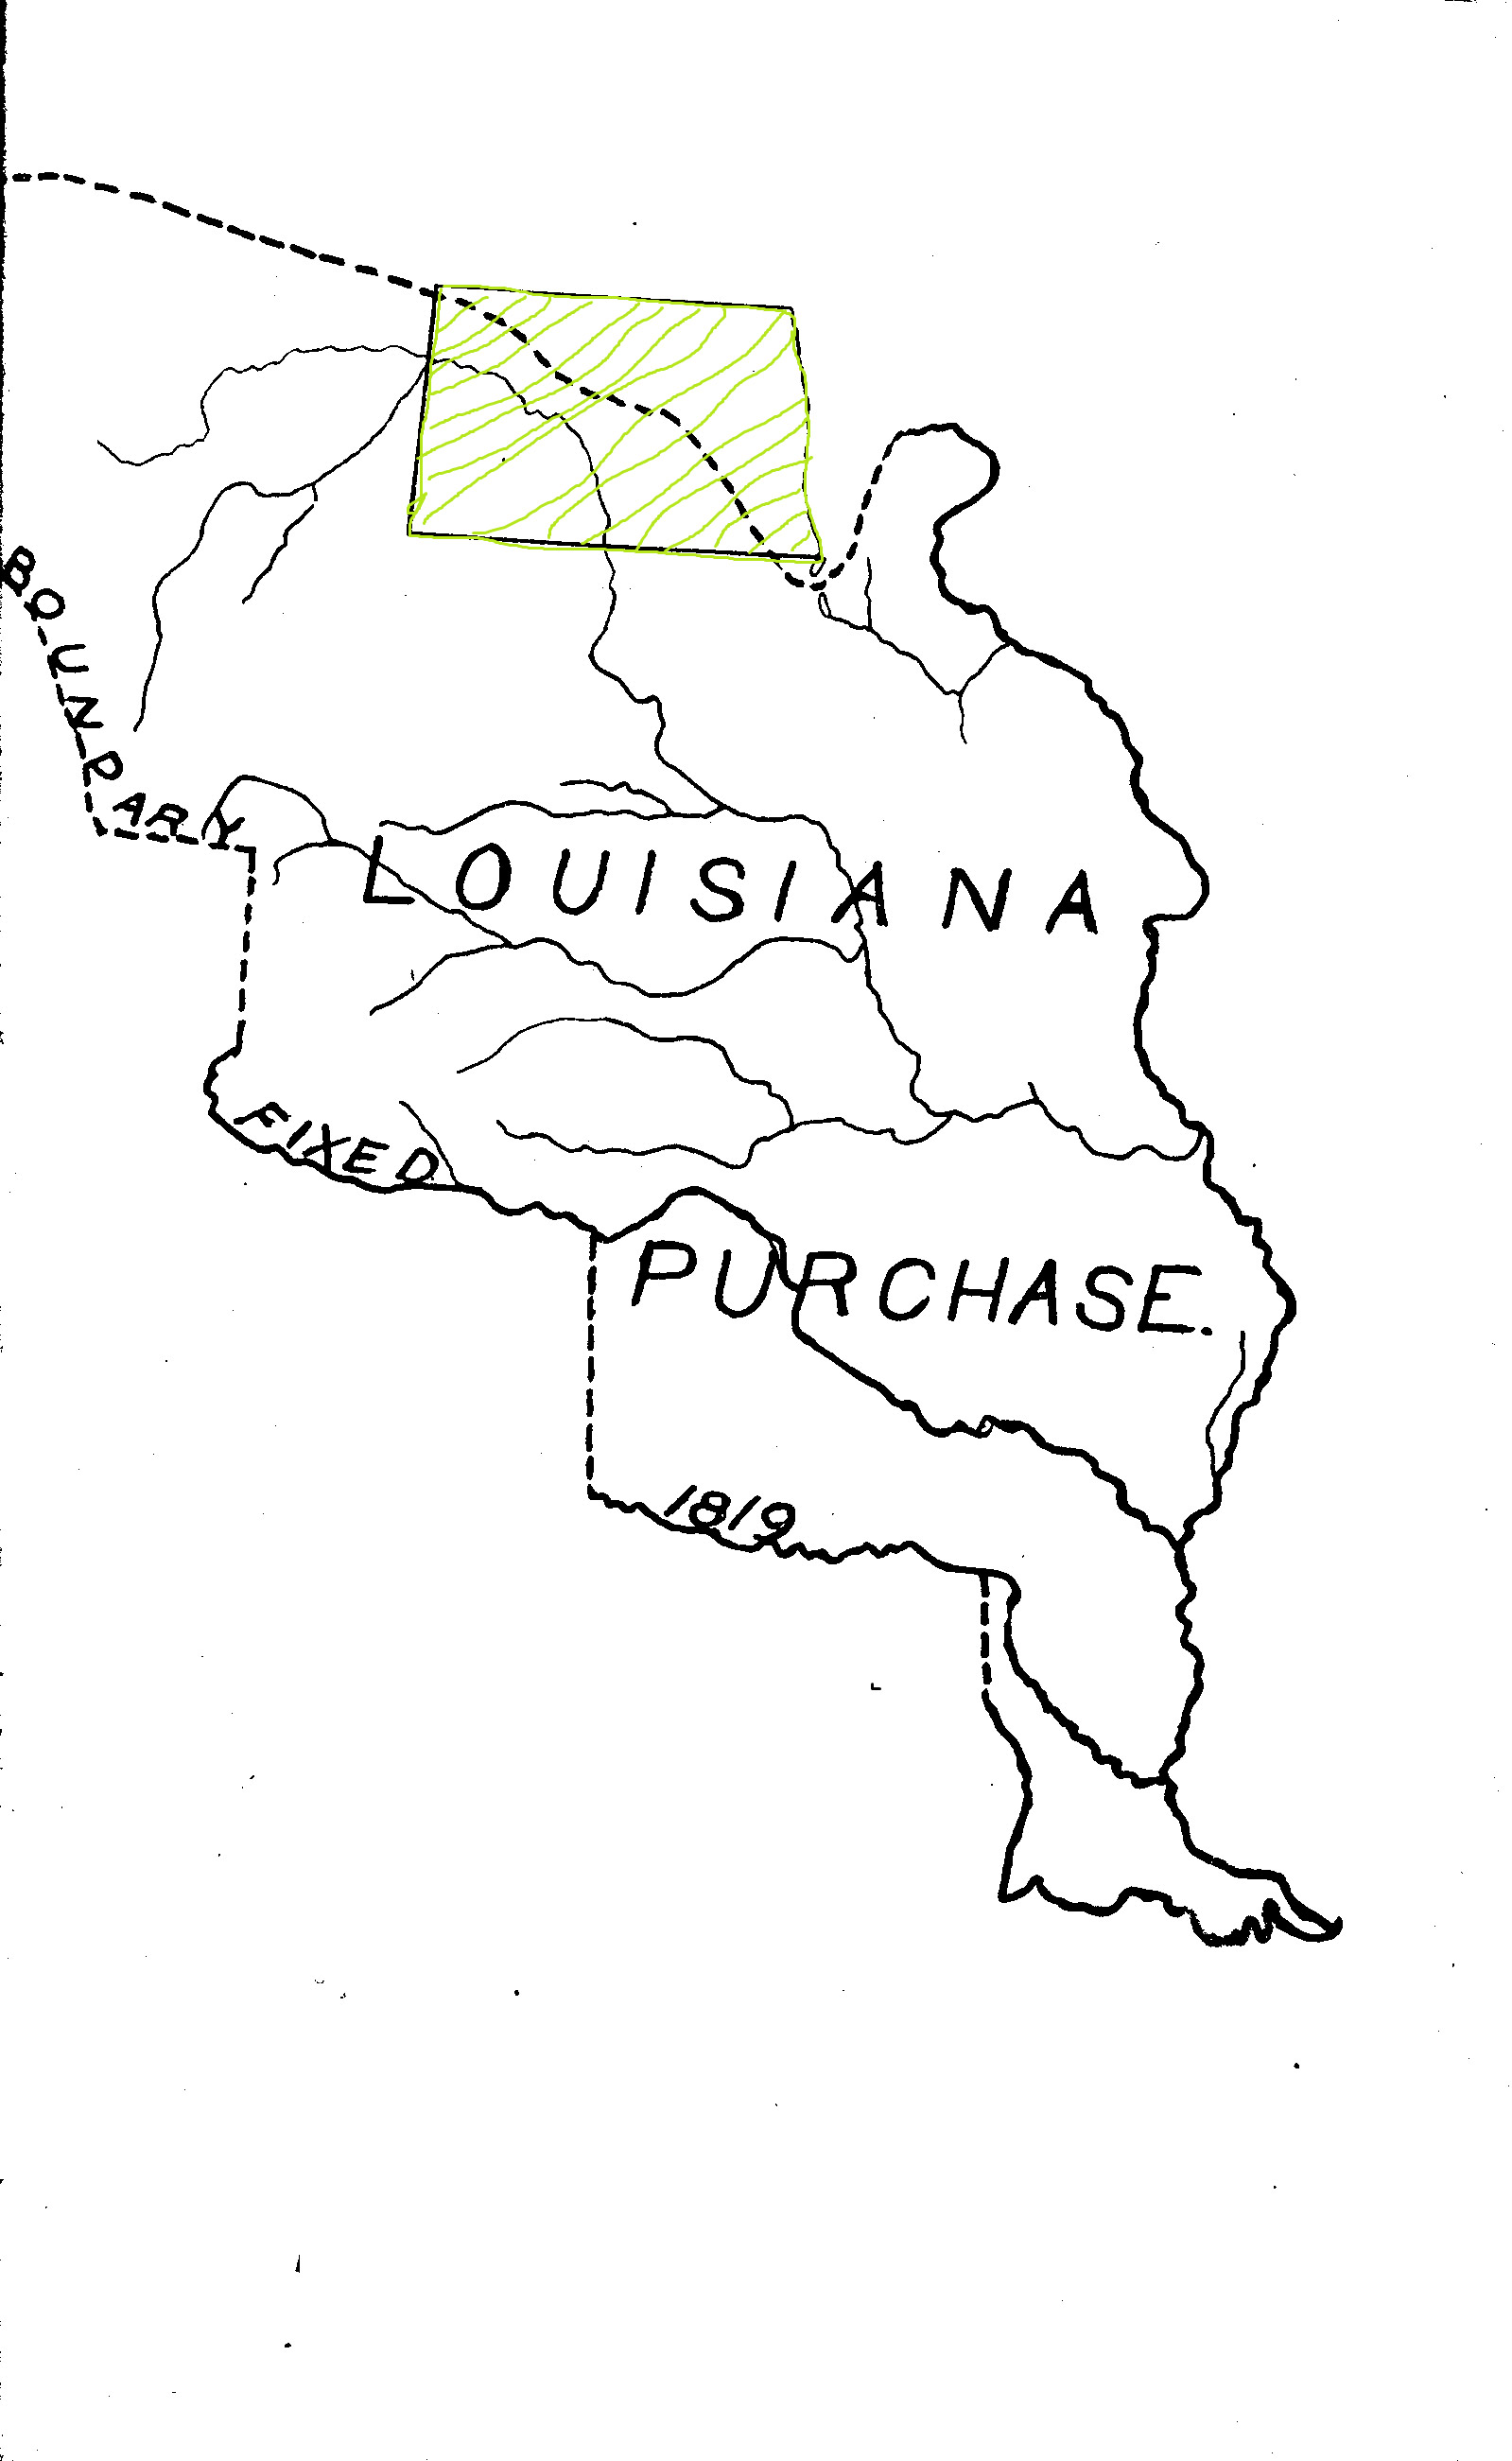 The Louisiana Purchase (1803) was defined as the drainage of the Missouri River and its tributaries. The eastern portion of North Dakota drains into the Red River.